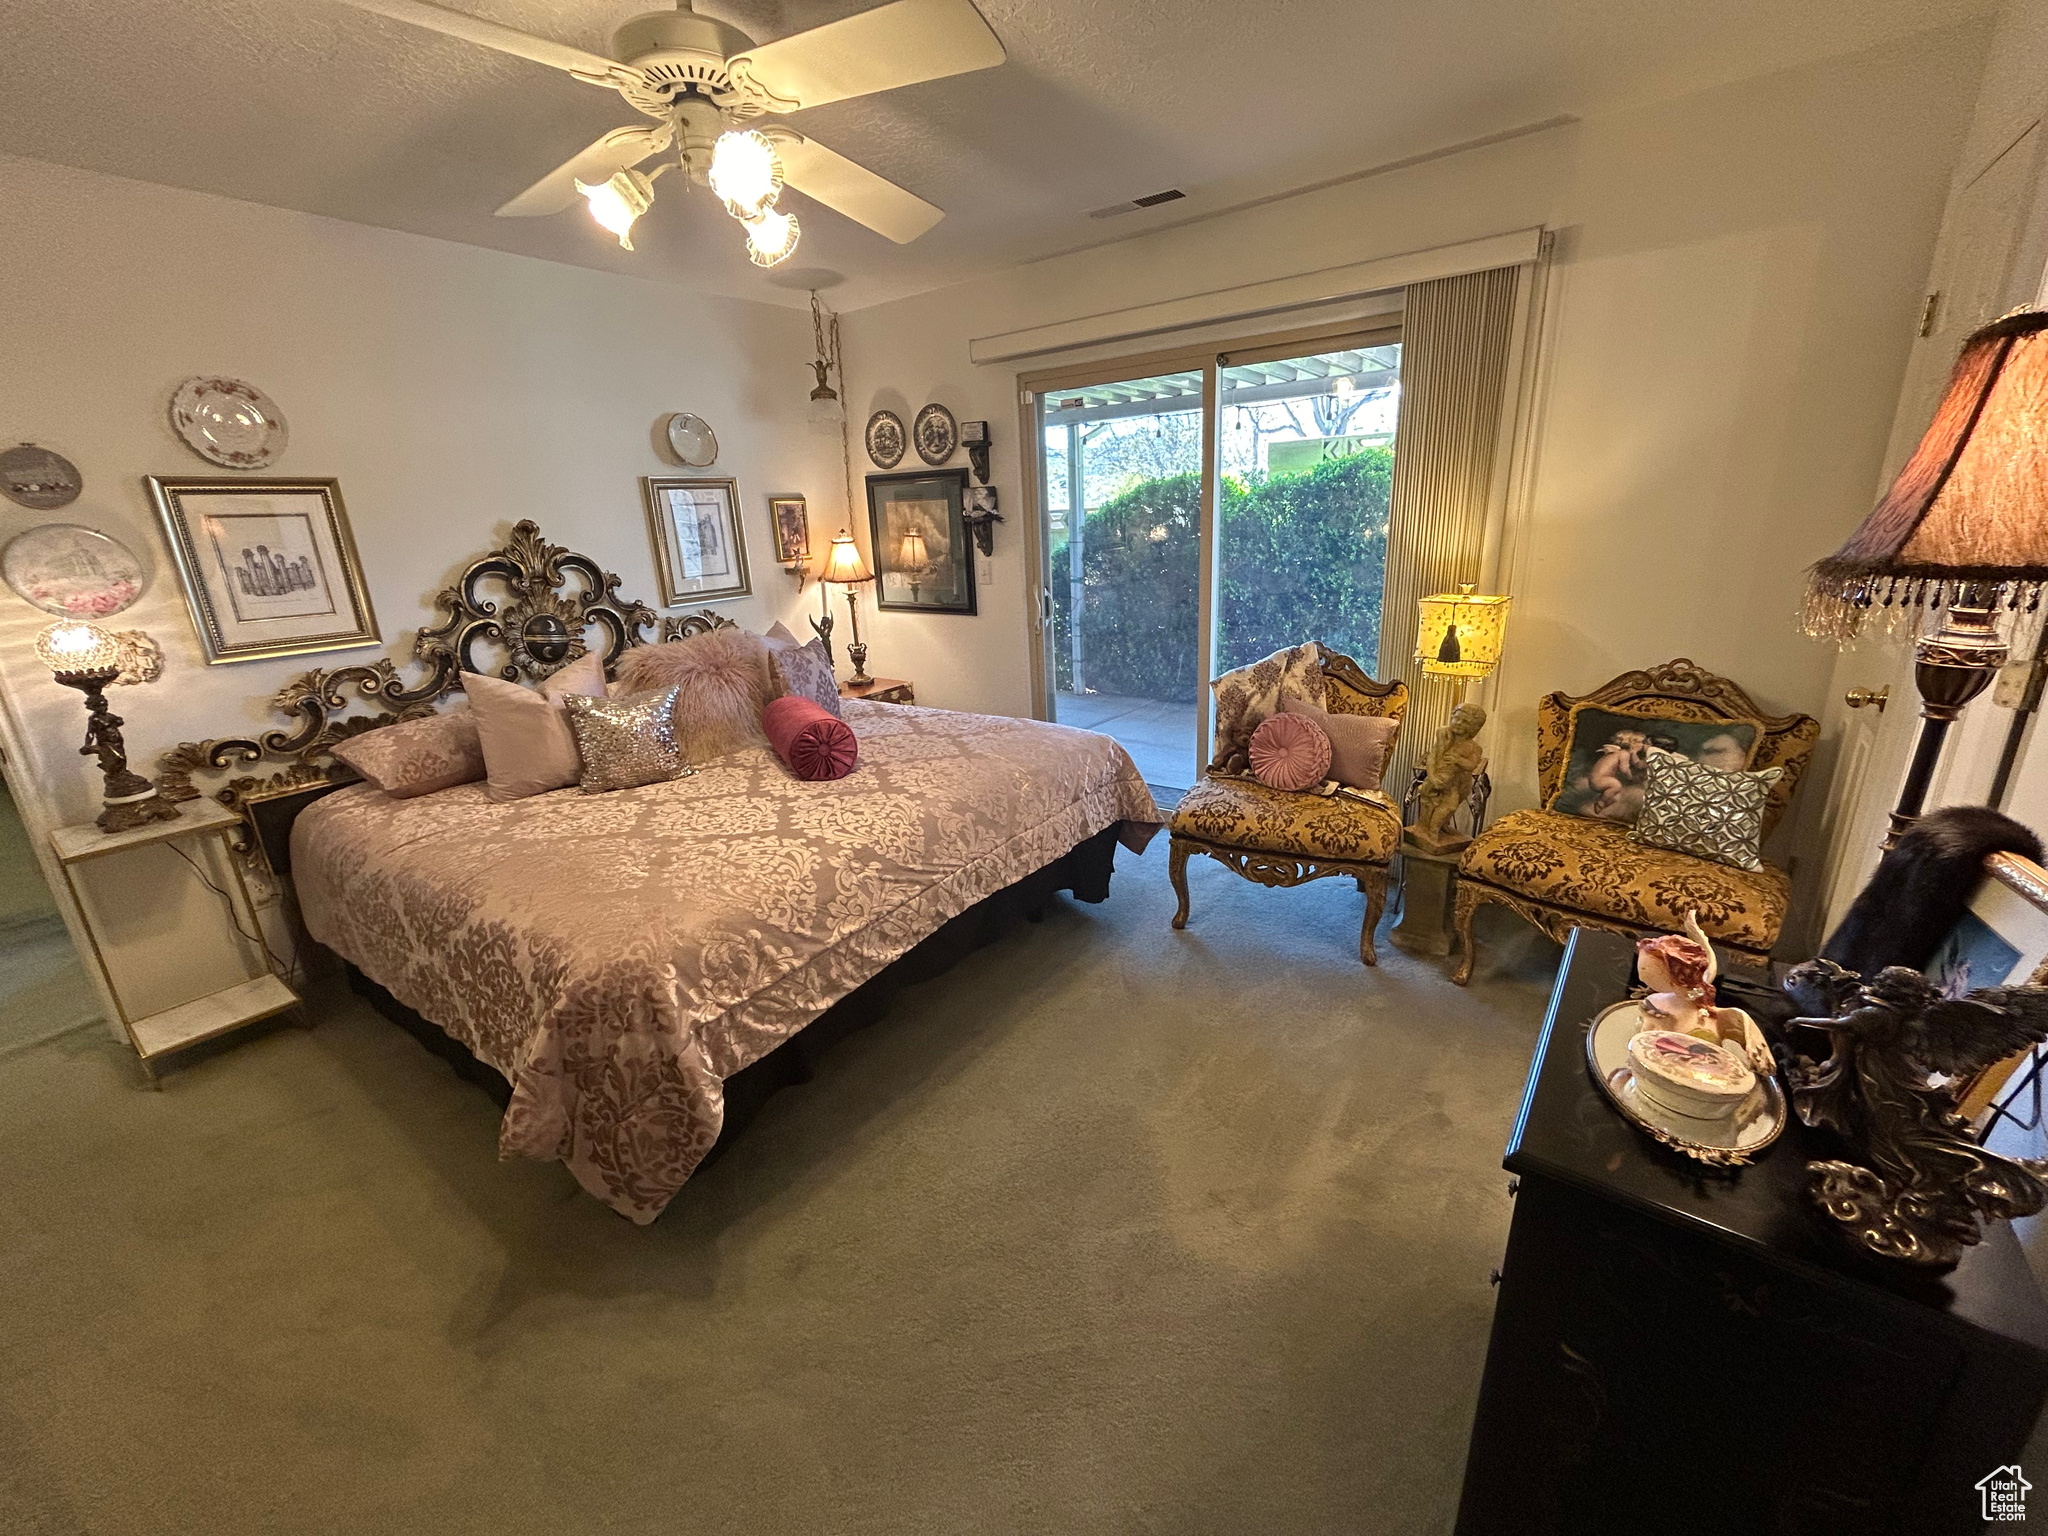 Carpeted bedroom with a textured ceiling, ceiling fan, and access to outside